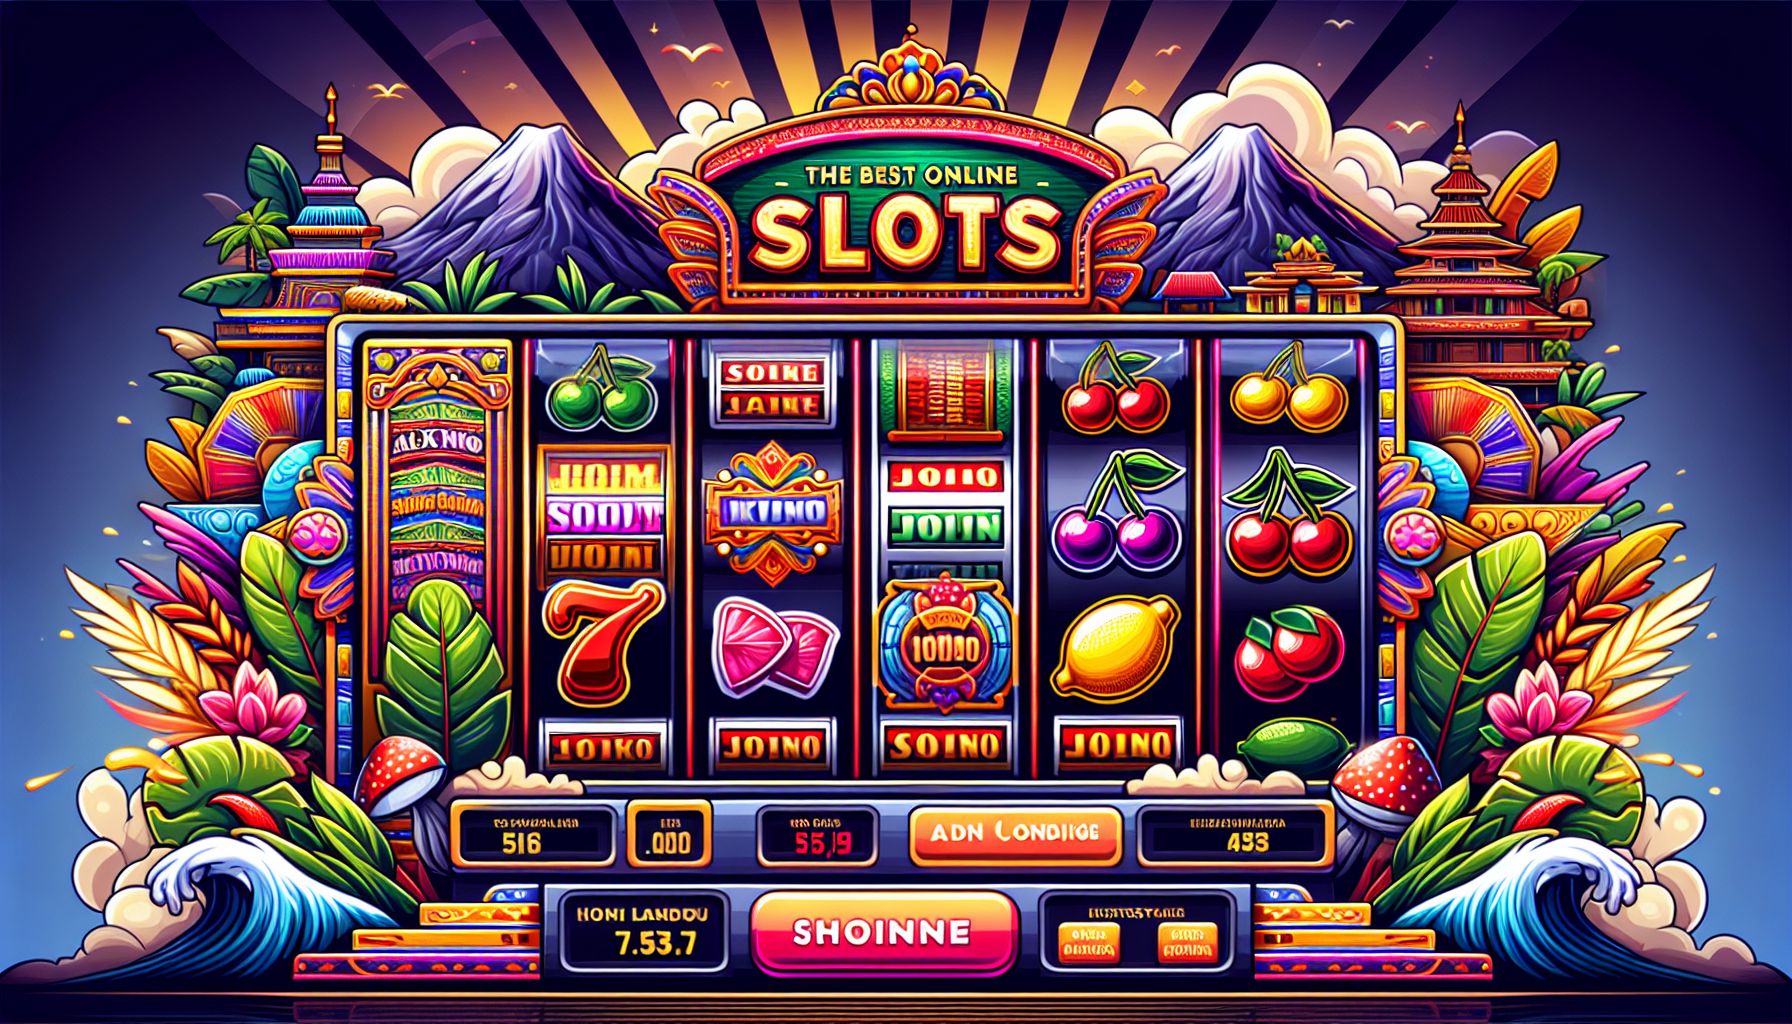 Slot Gacor: The Best Online Slots for Indonesia